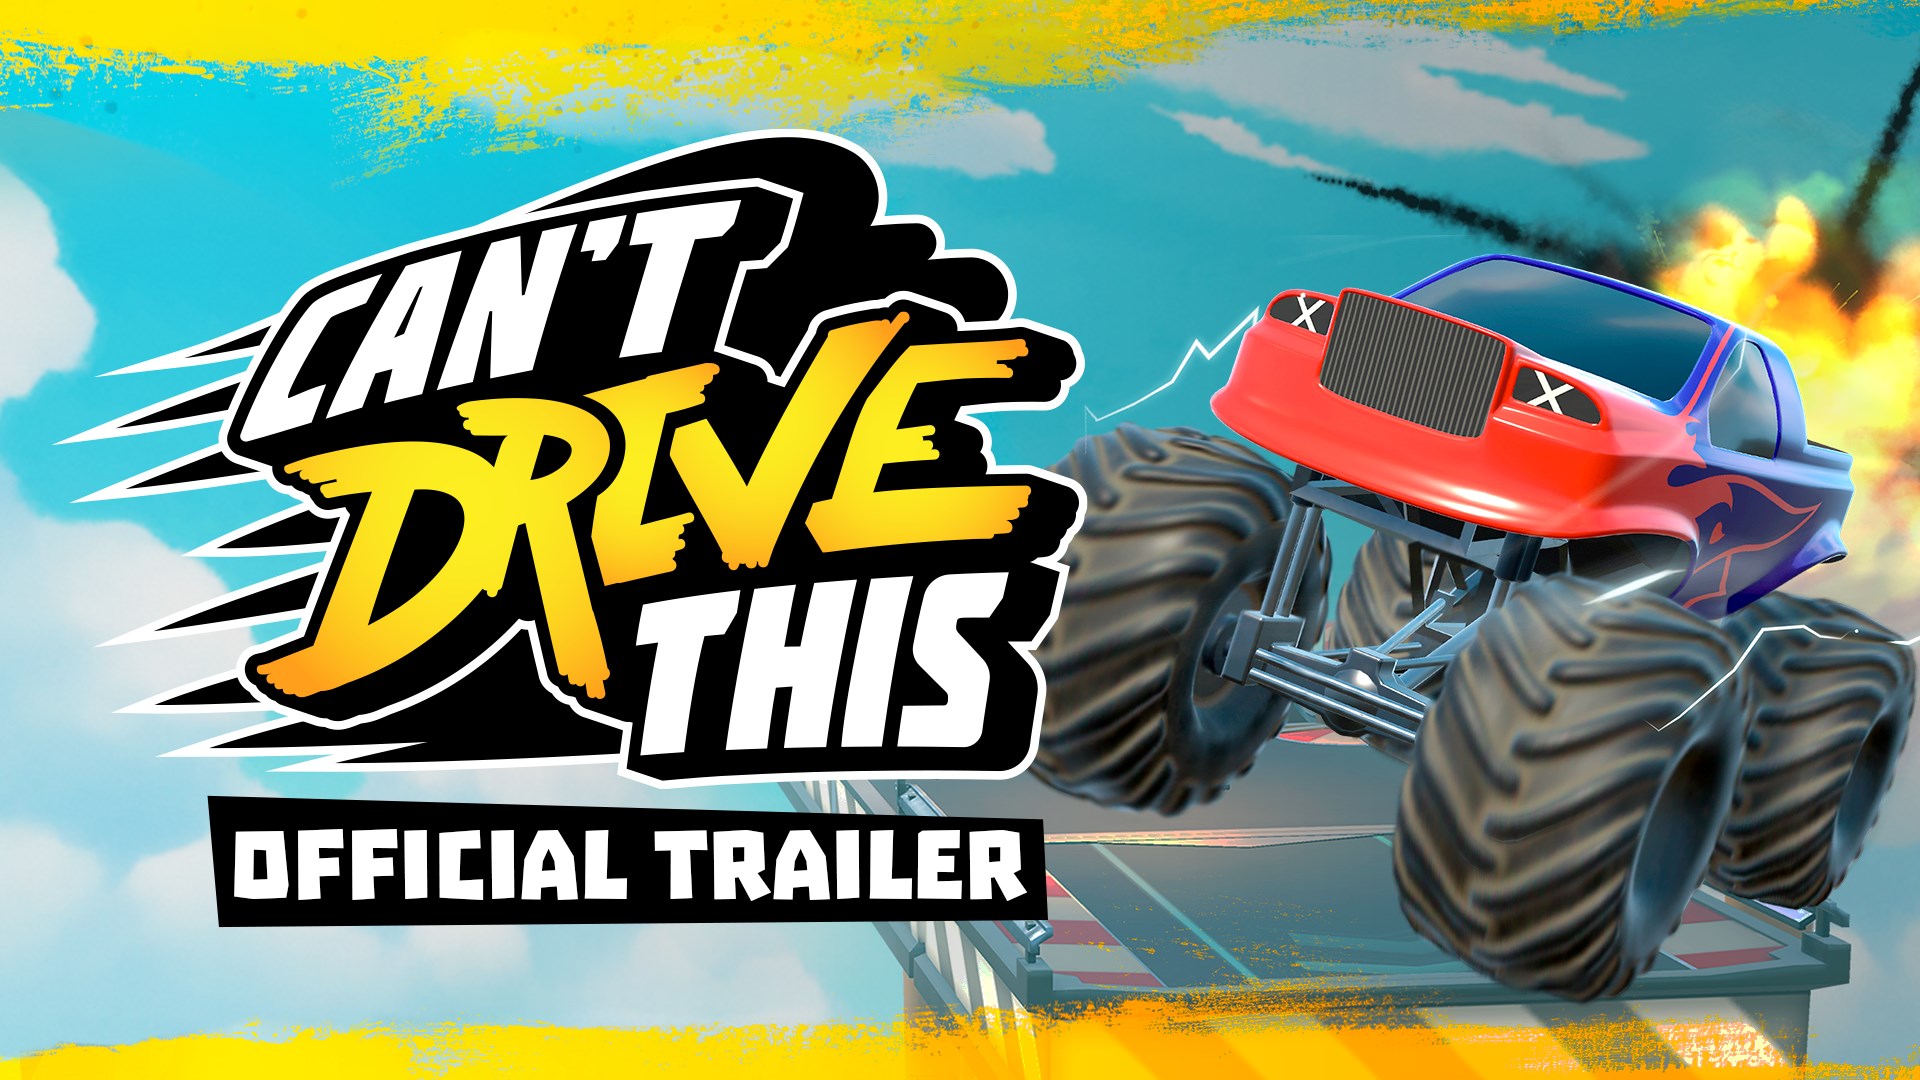 Video For Can’t Drive This Is Now Available For Digital Pre-order And Pre-download On Xbox One And Xbox Series X|S